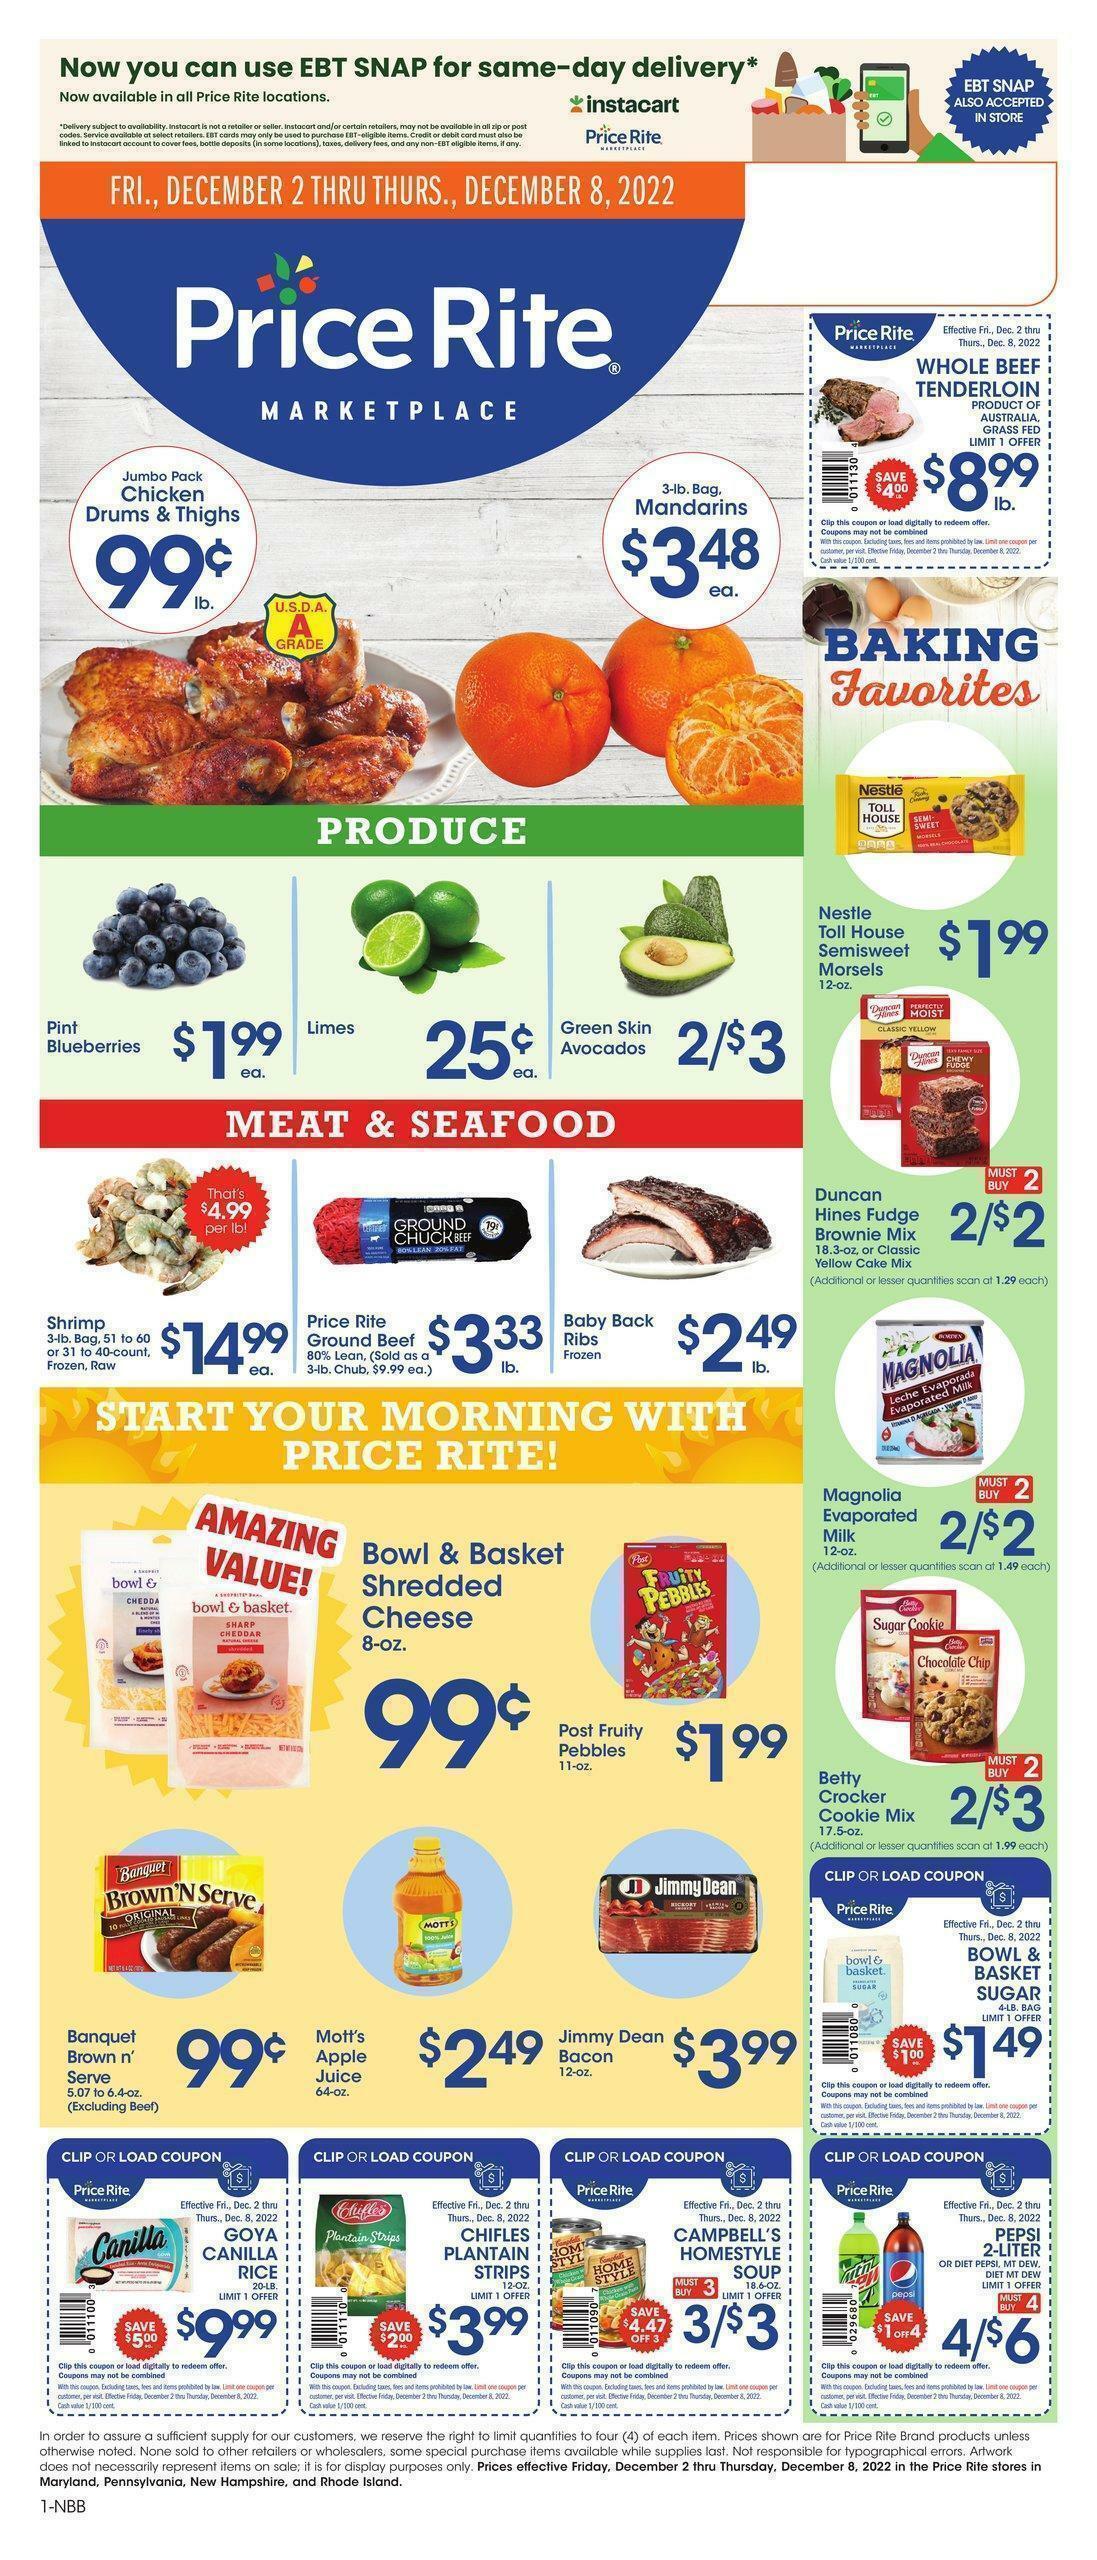 Price Rite Weekly Ad from December 2